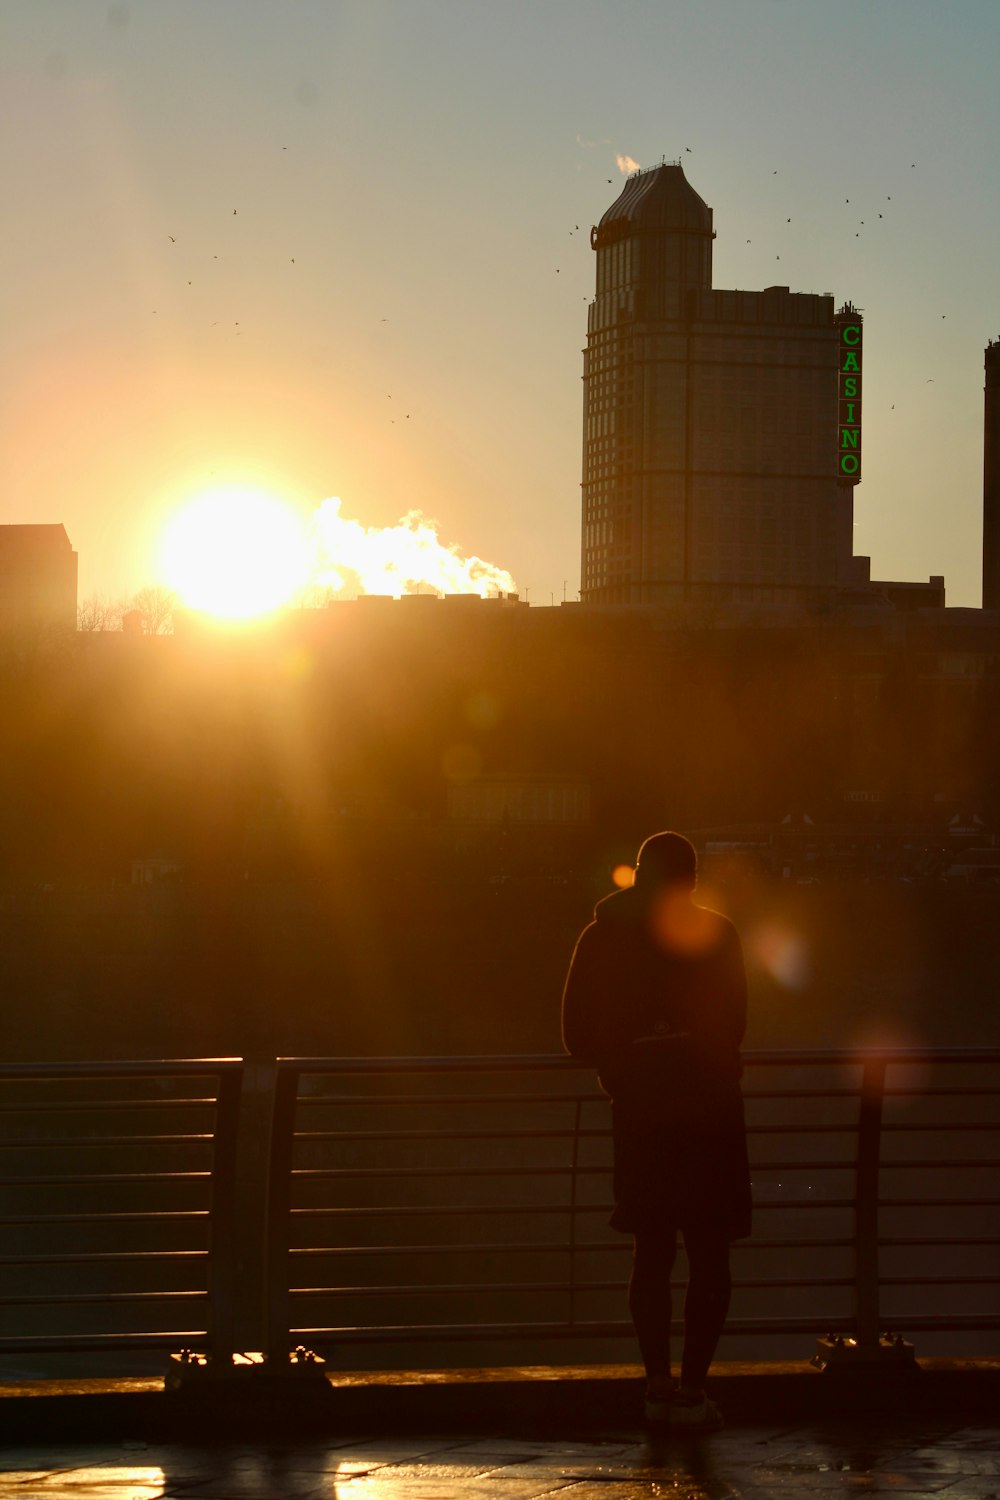 a person standing on a bridge with the sun setting in the background